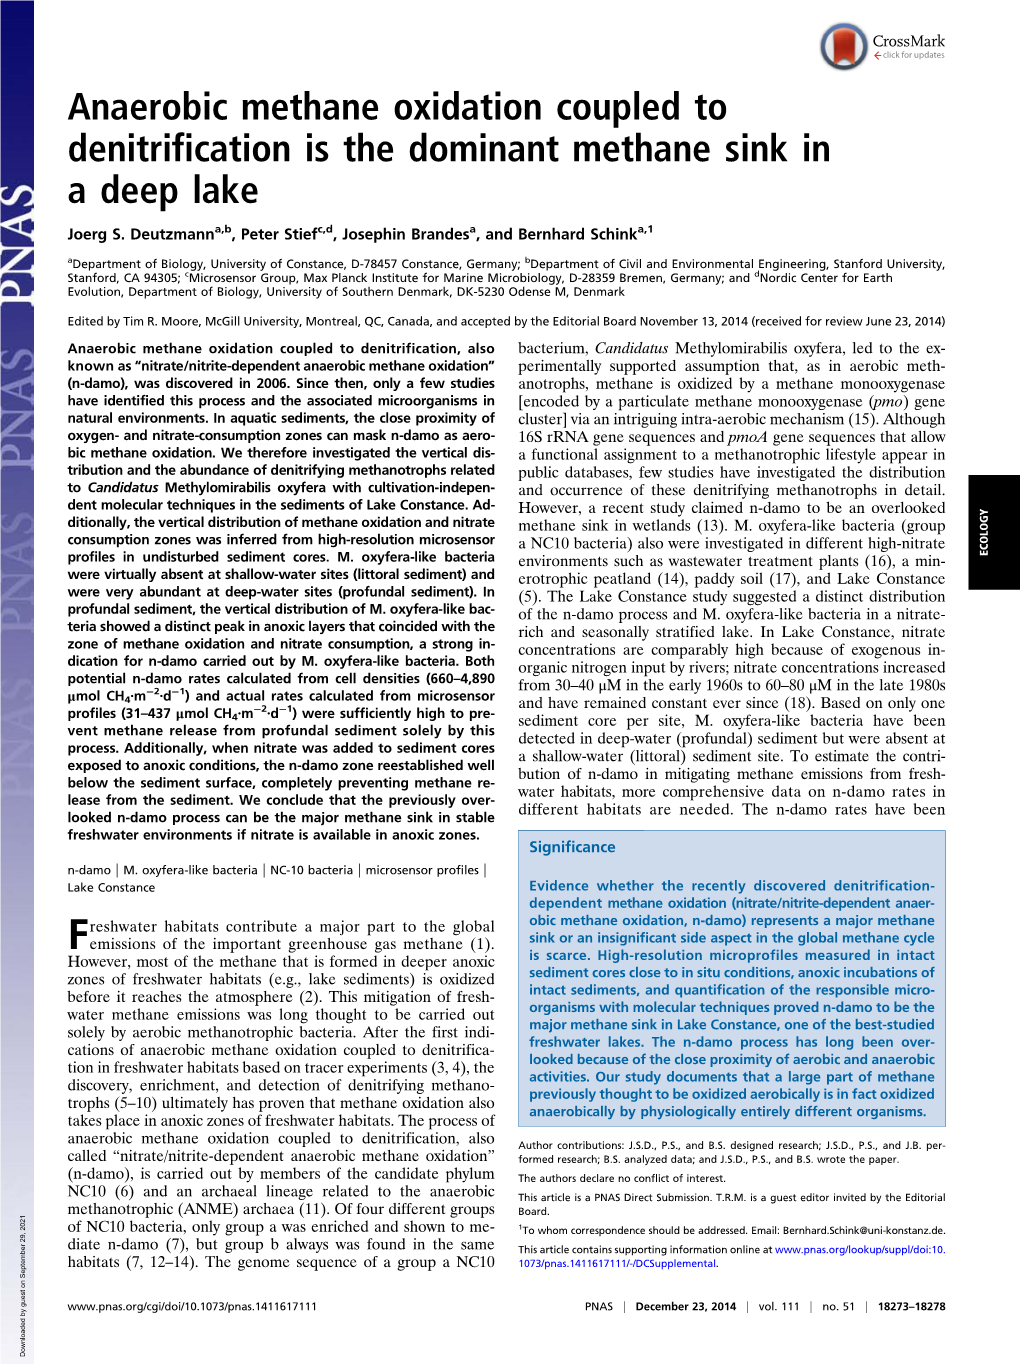 Anaerobic Methane Oxidation Coupled to Denitrification Is the Dominant Methane Sink in a Deep Lake